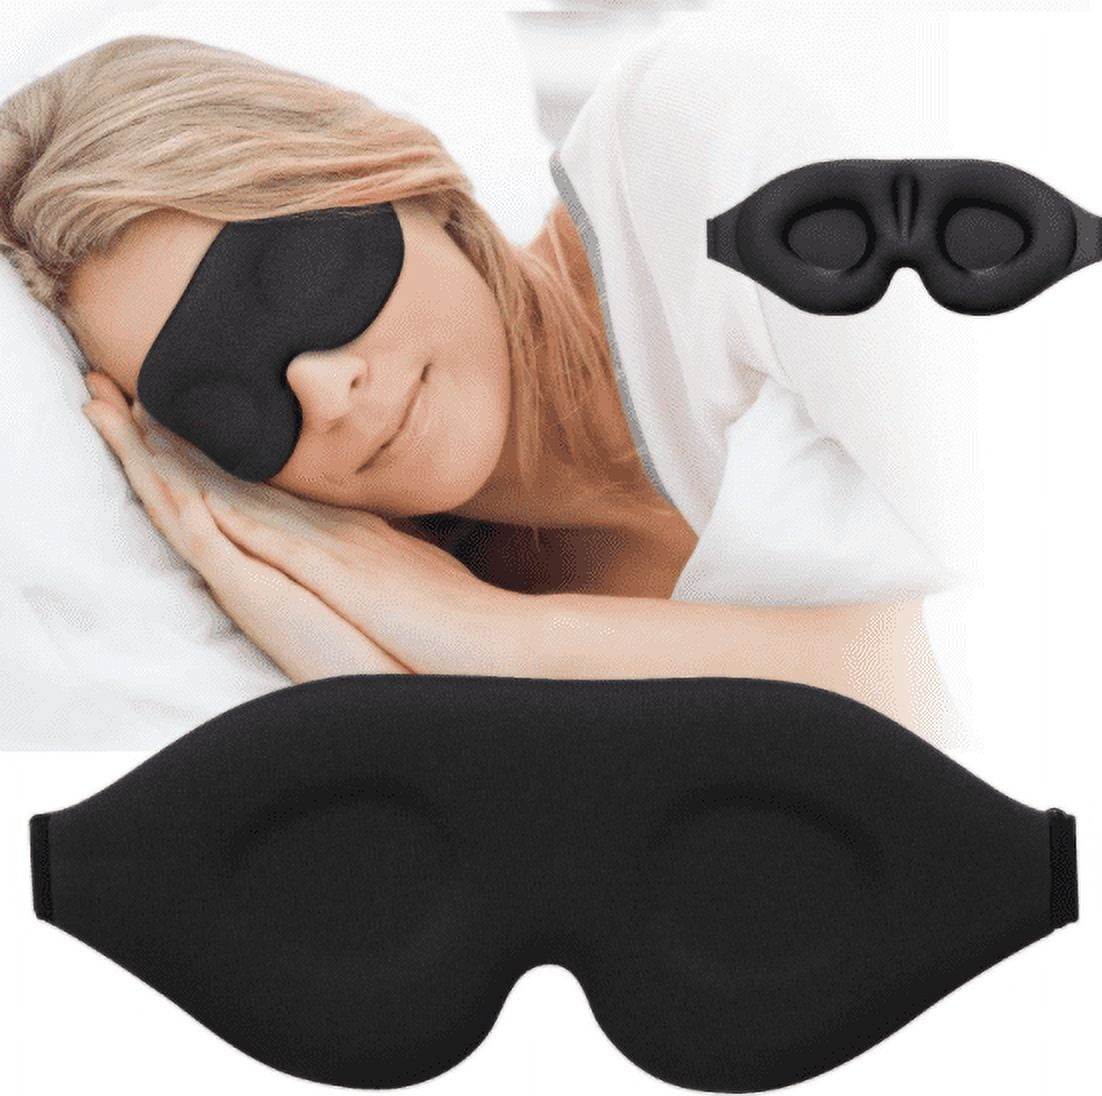 LynaRei Sleeping Mask Octopus Sleep Eye Mask Blindfold with Adjustable  Strap Purple Tentacles Soft Eye Cover for Blocking Out Lights